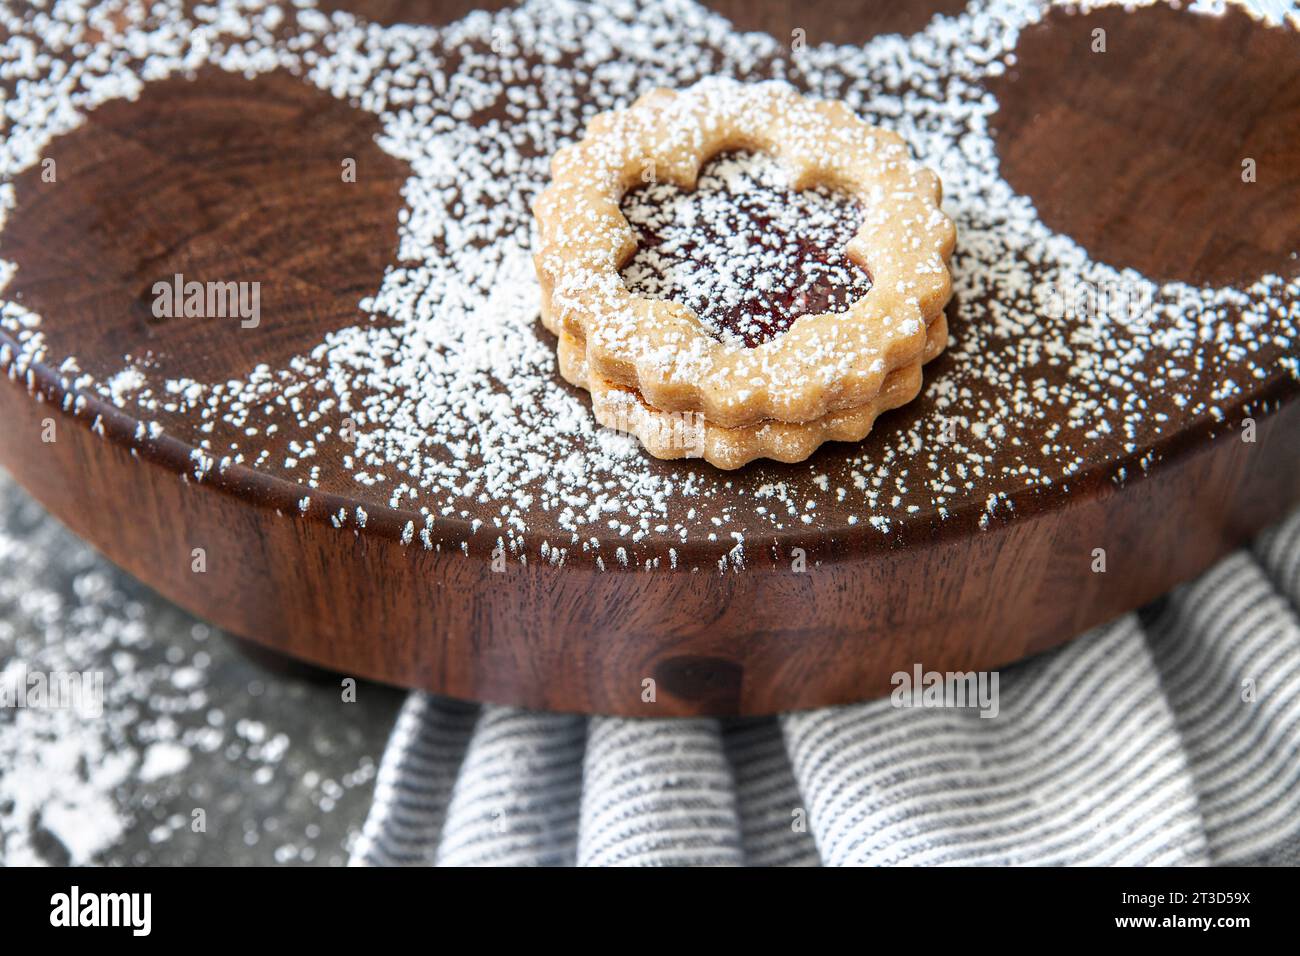 Close-up of one Linzer cookie dusted with powdered sugar on round wood board Stock Photo